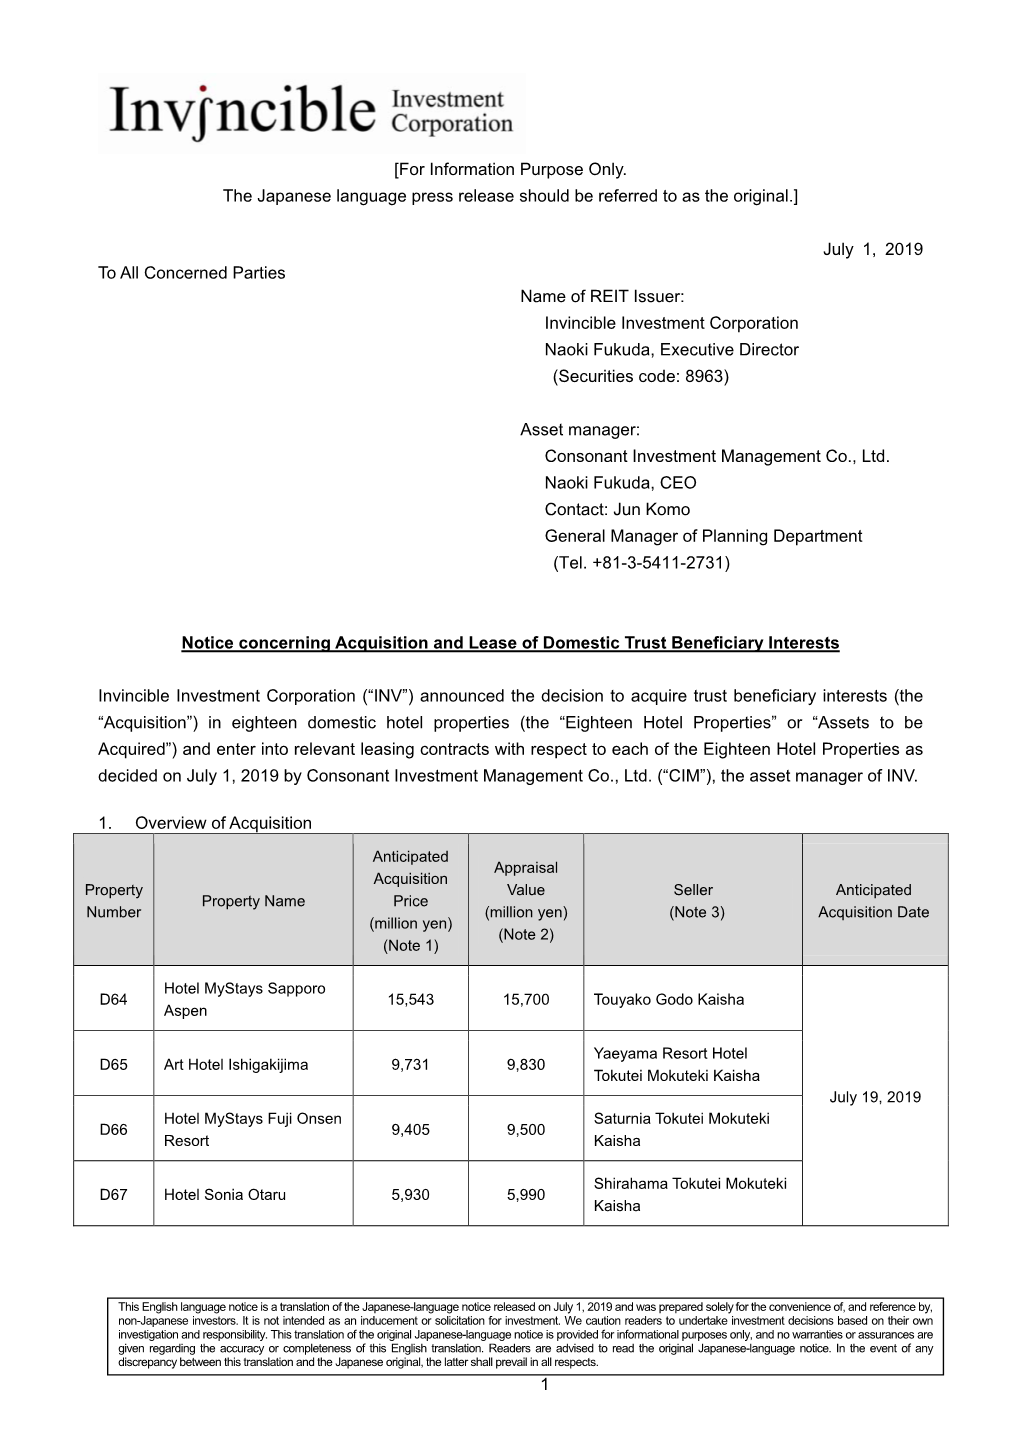 July 1, 2019 to All Concerned Parties Name of REIT Issuer: Invincible Investment Corporation Naoki Fukuda, Executive Director (Securities Code: 8963)